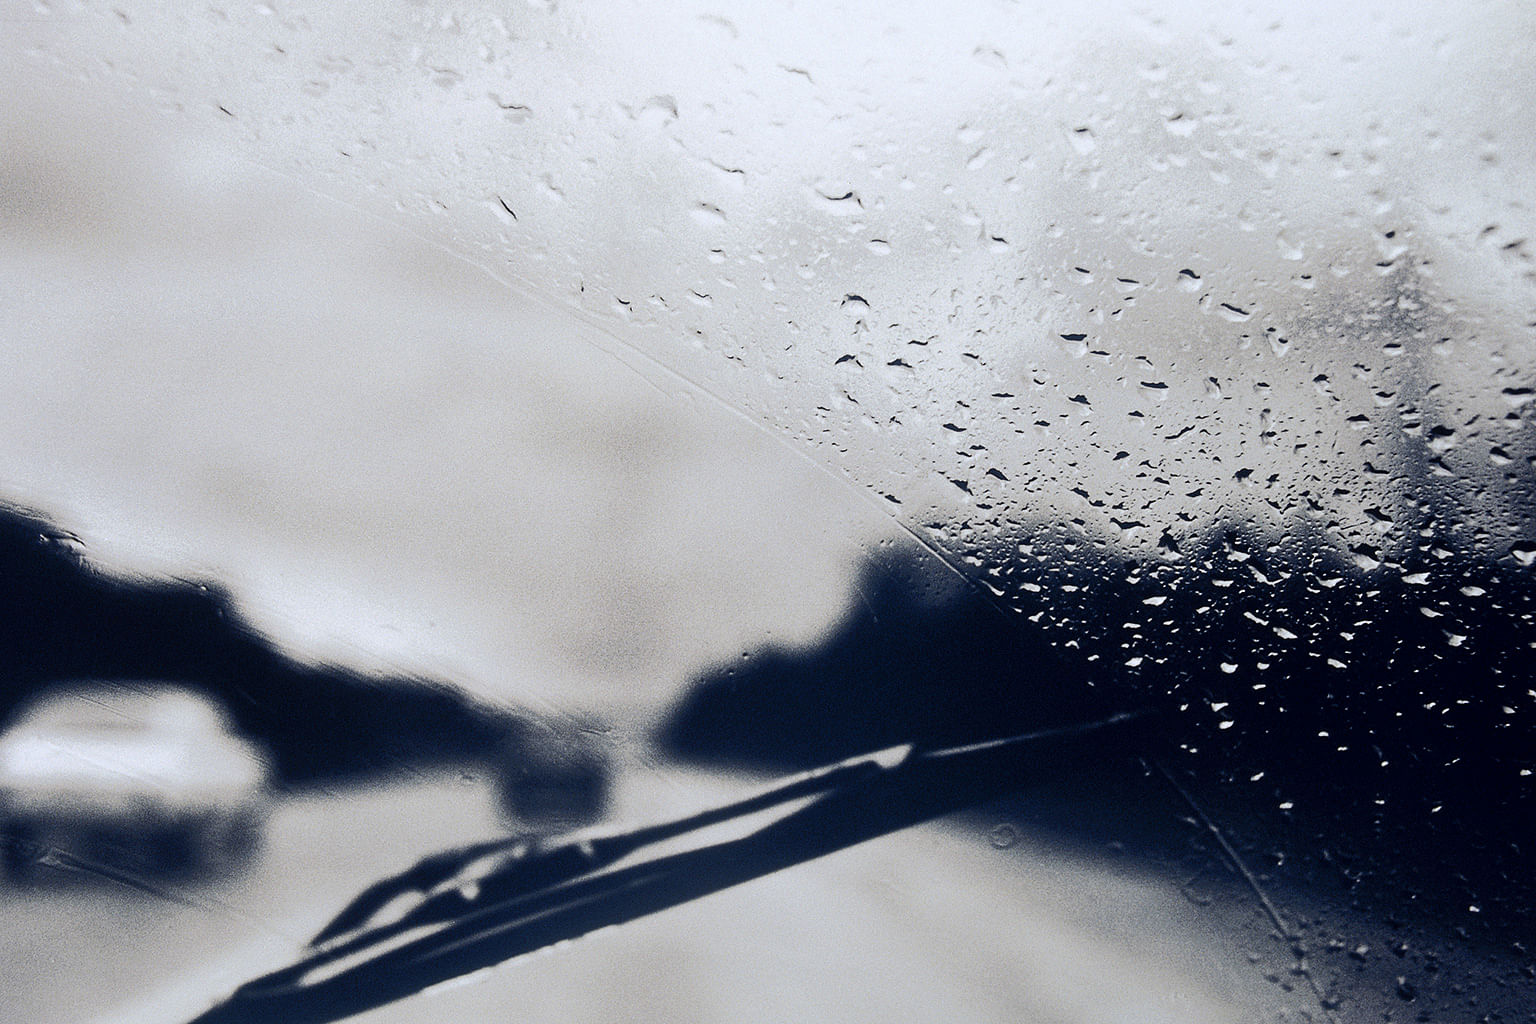 wiper blades activated on car during wet weather condition